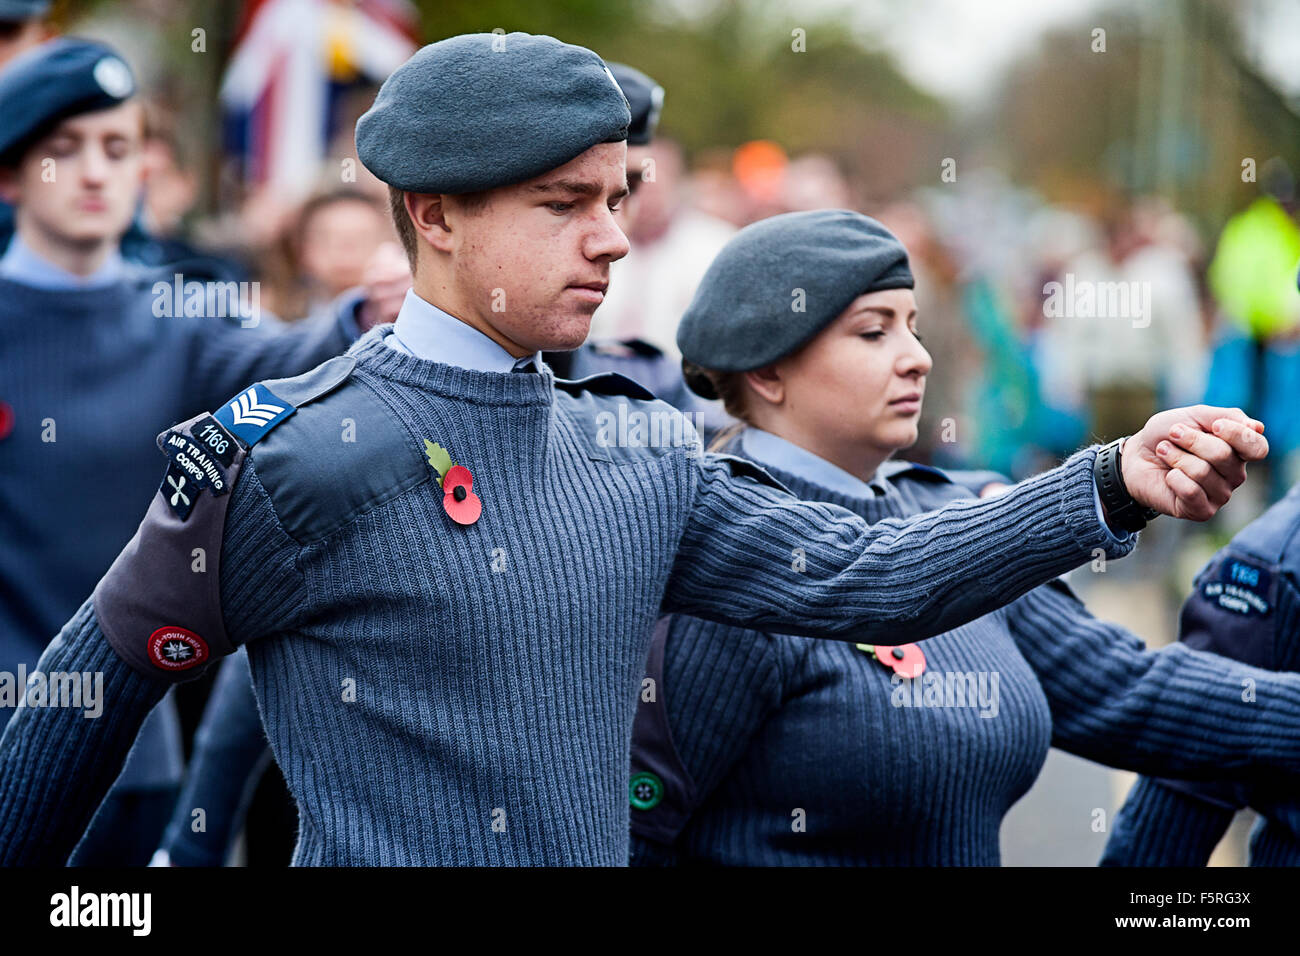 Remembrance day parade Welwyn Garden City, hertfordshire, United Kingdom. A collection of photos from the recent parade in Welwy Stock Photo